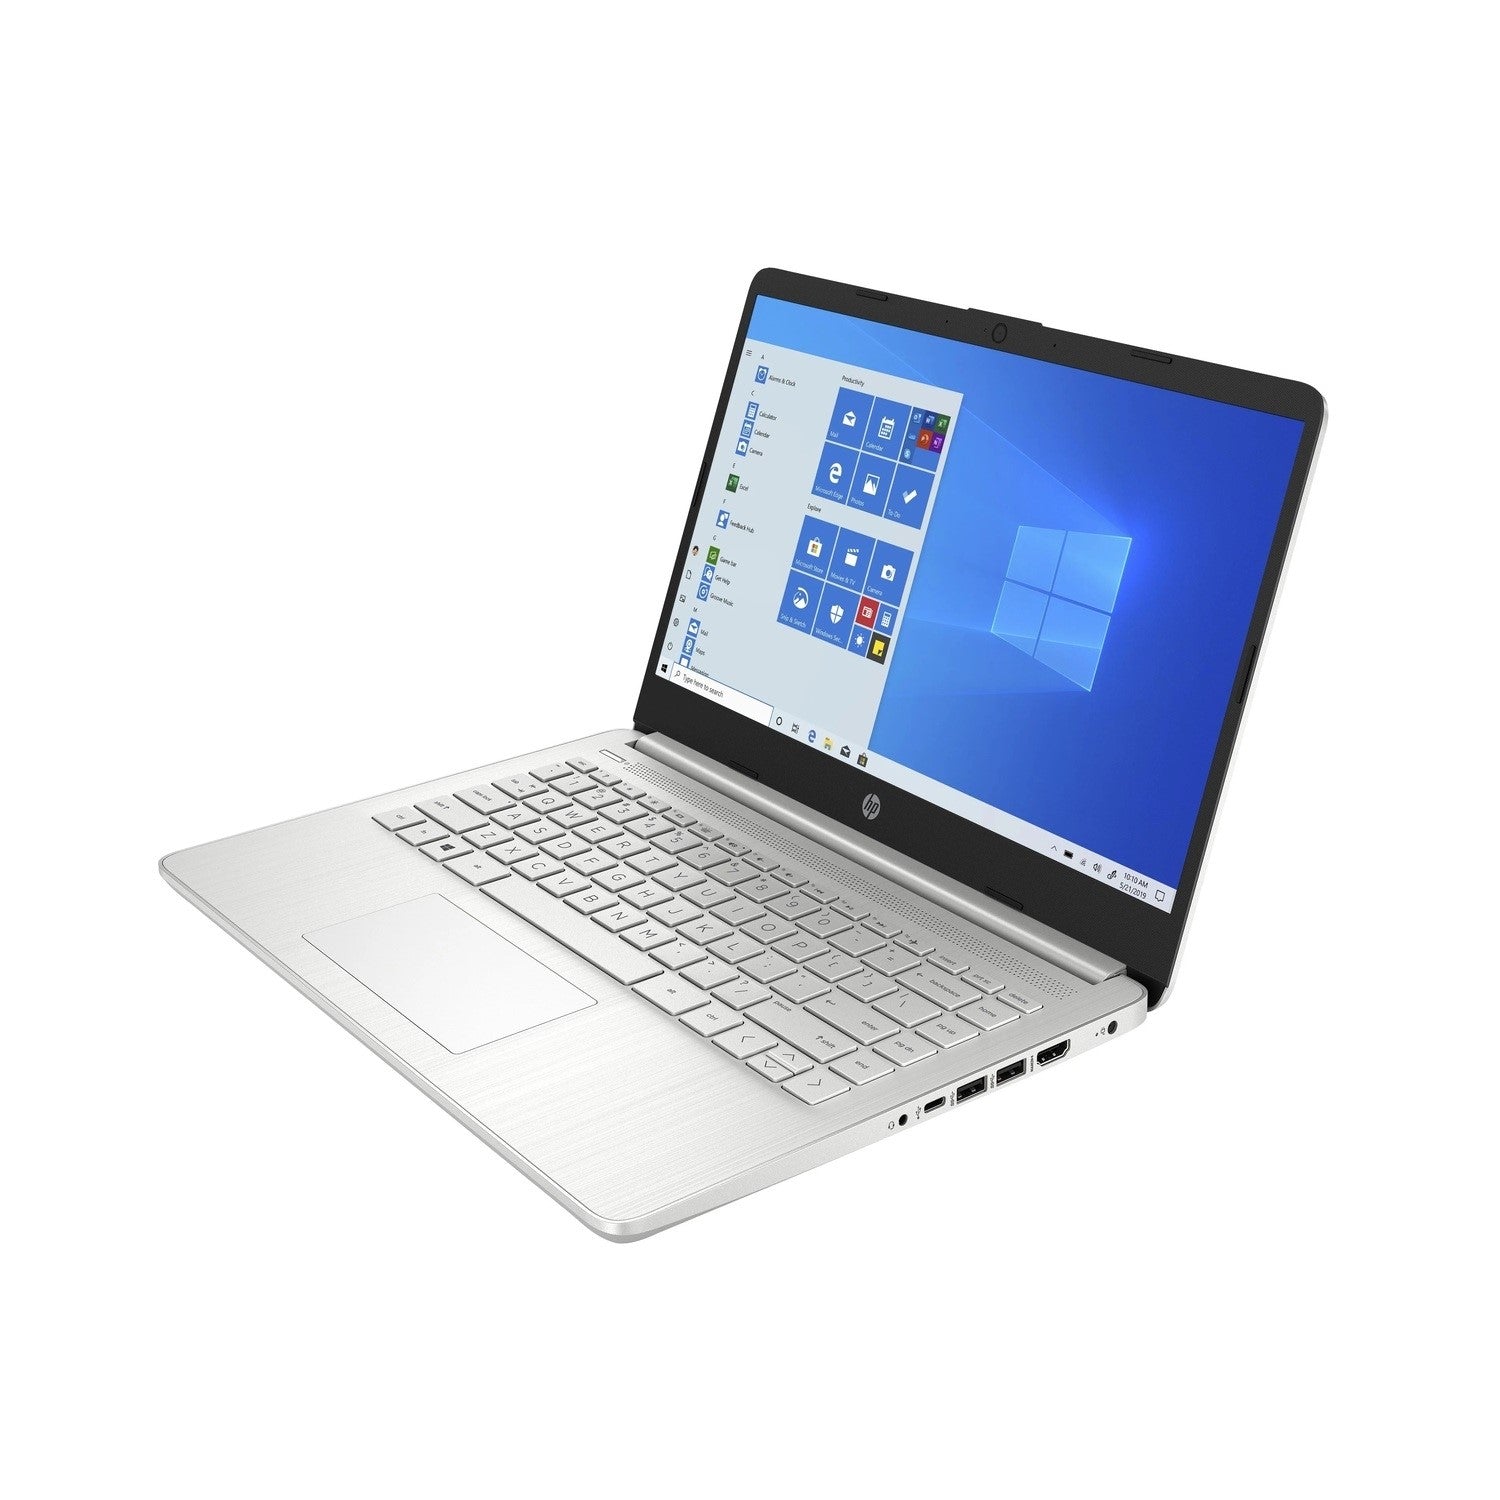 HP 14S-DQ2514SA 14" Laptop Intel Core i7 8GB RAM 512GB SSD - Silver - Refurbished Excellent